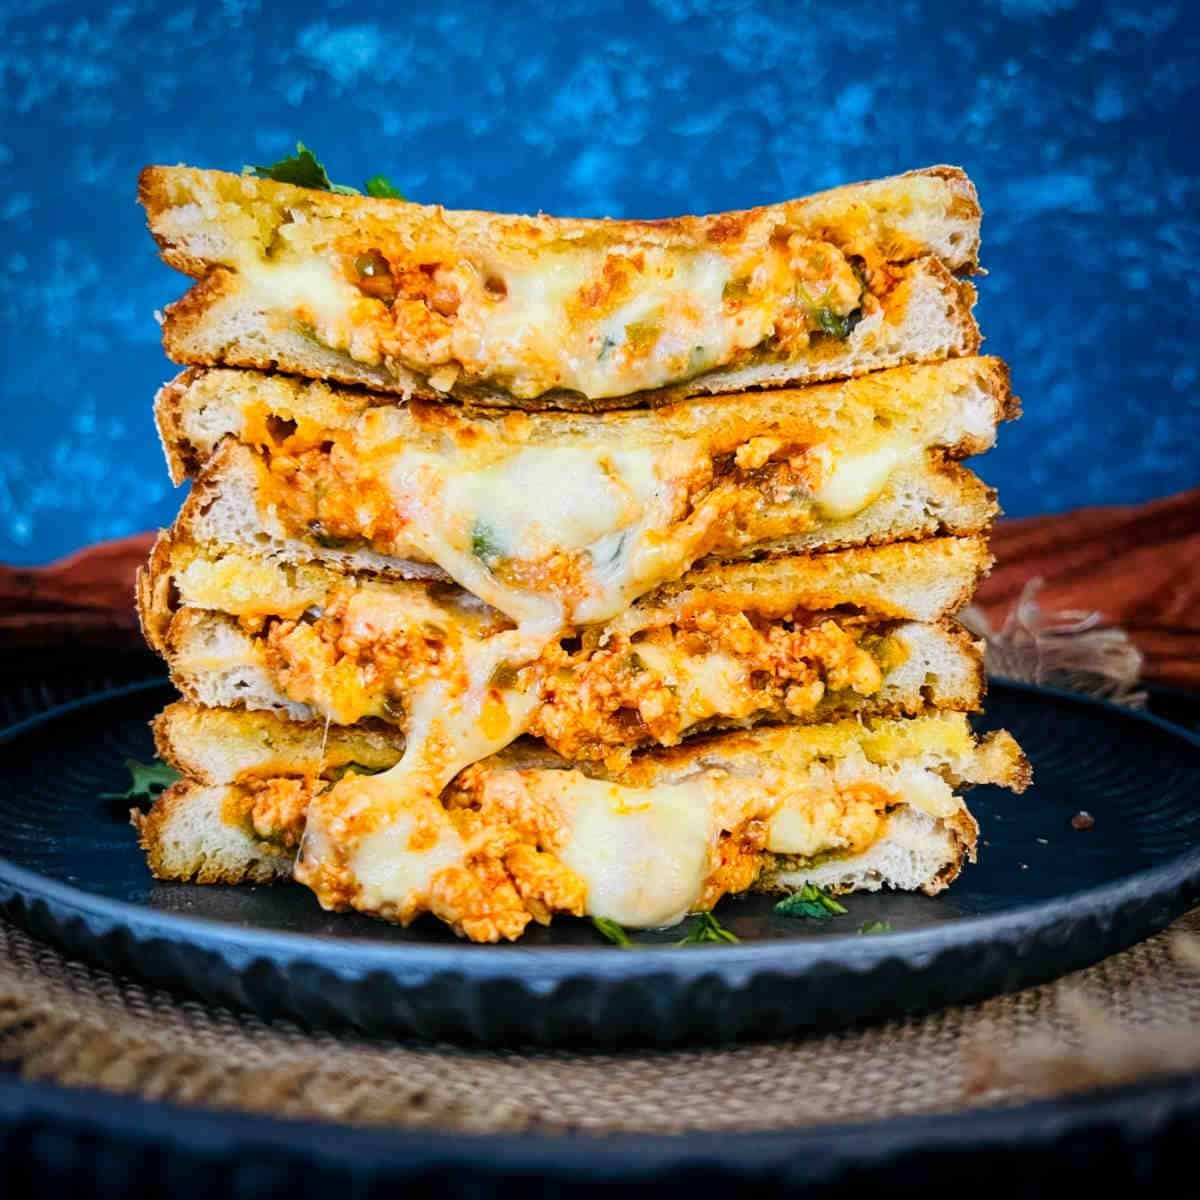 This unique grilled cheese sandwich is anything but ordinary!